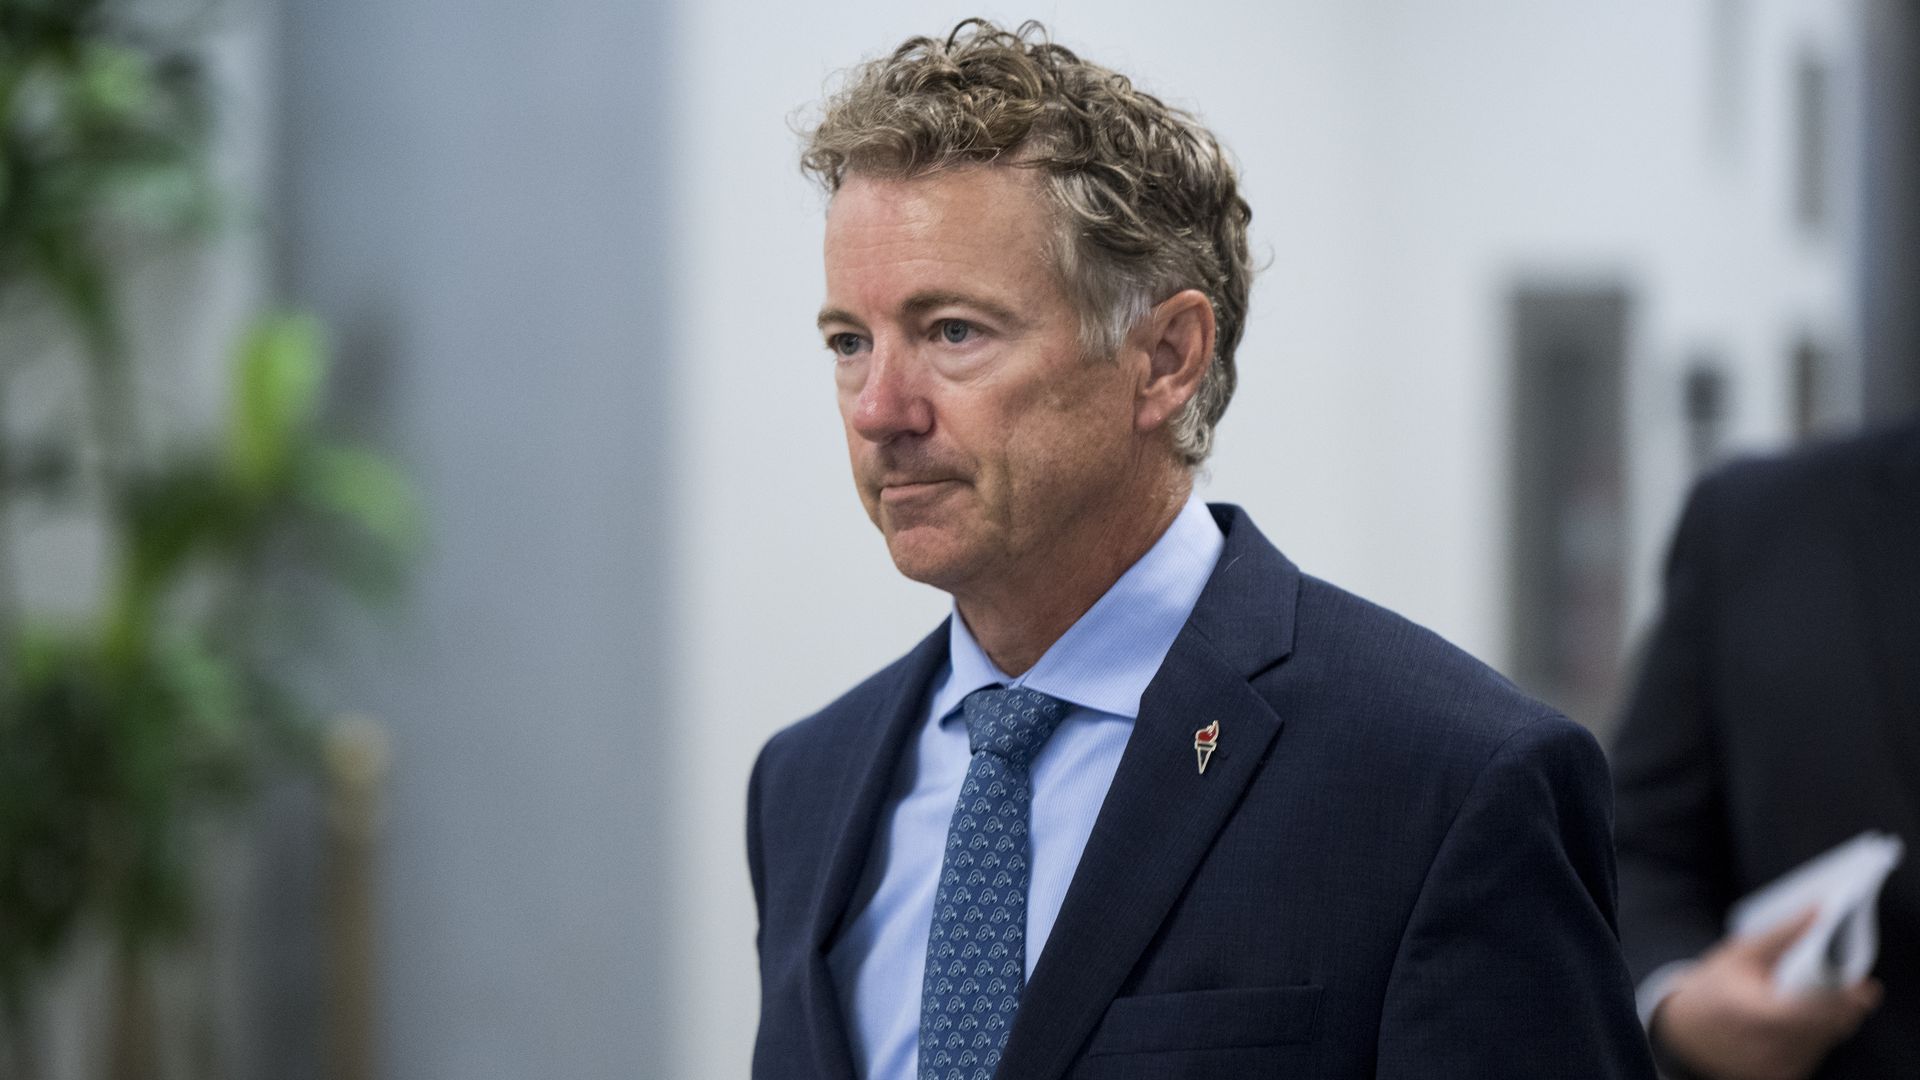 In this image, Rand Paul wears a suit and tie and walks down a hallway.